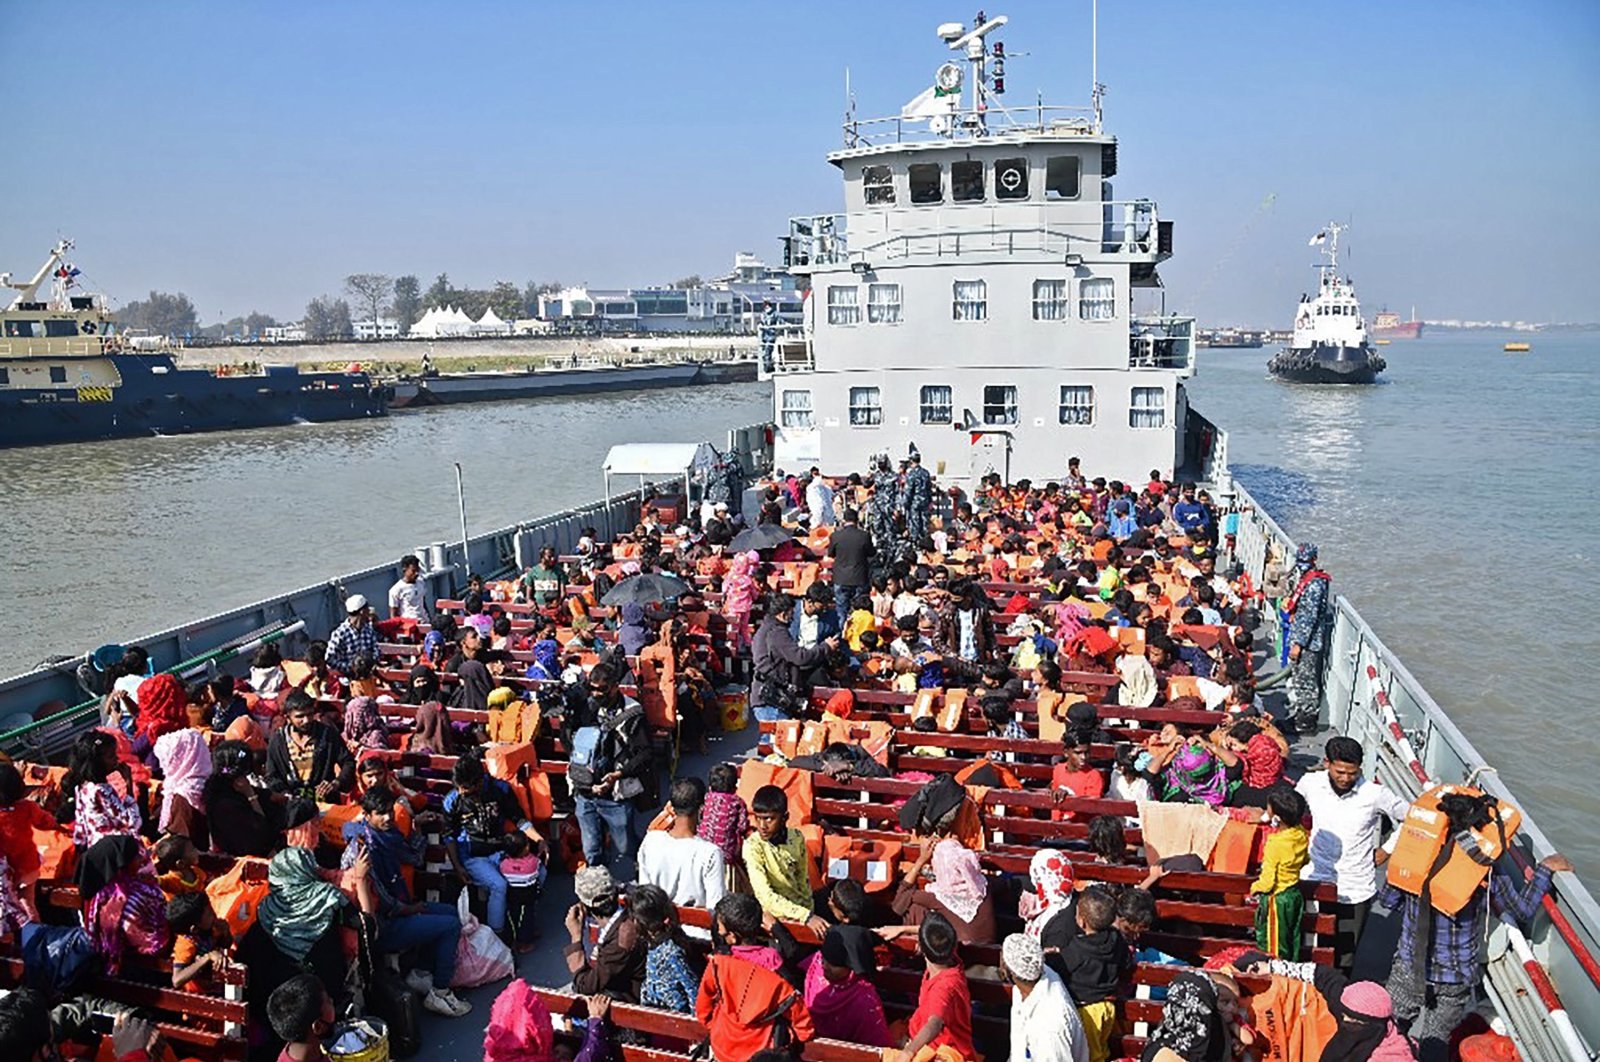 Rohingya refugees are seen on a Bangladesh Navy ship while they are being relocated to Bhashan Char Island in the Bay of Bengal, Chittagong, Bangladesh, Jan. 29, 2021. (AFP Photo)